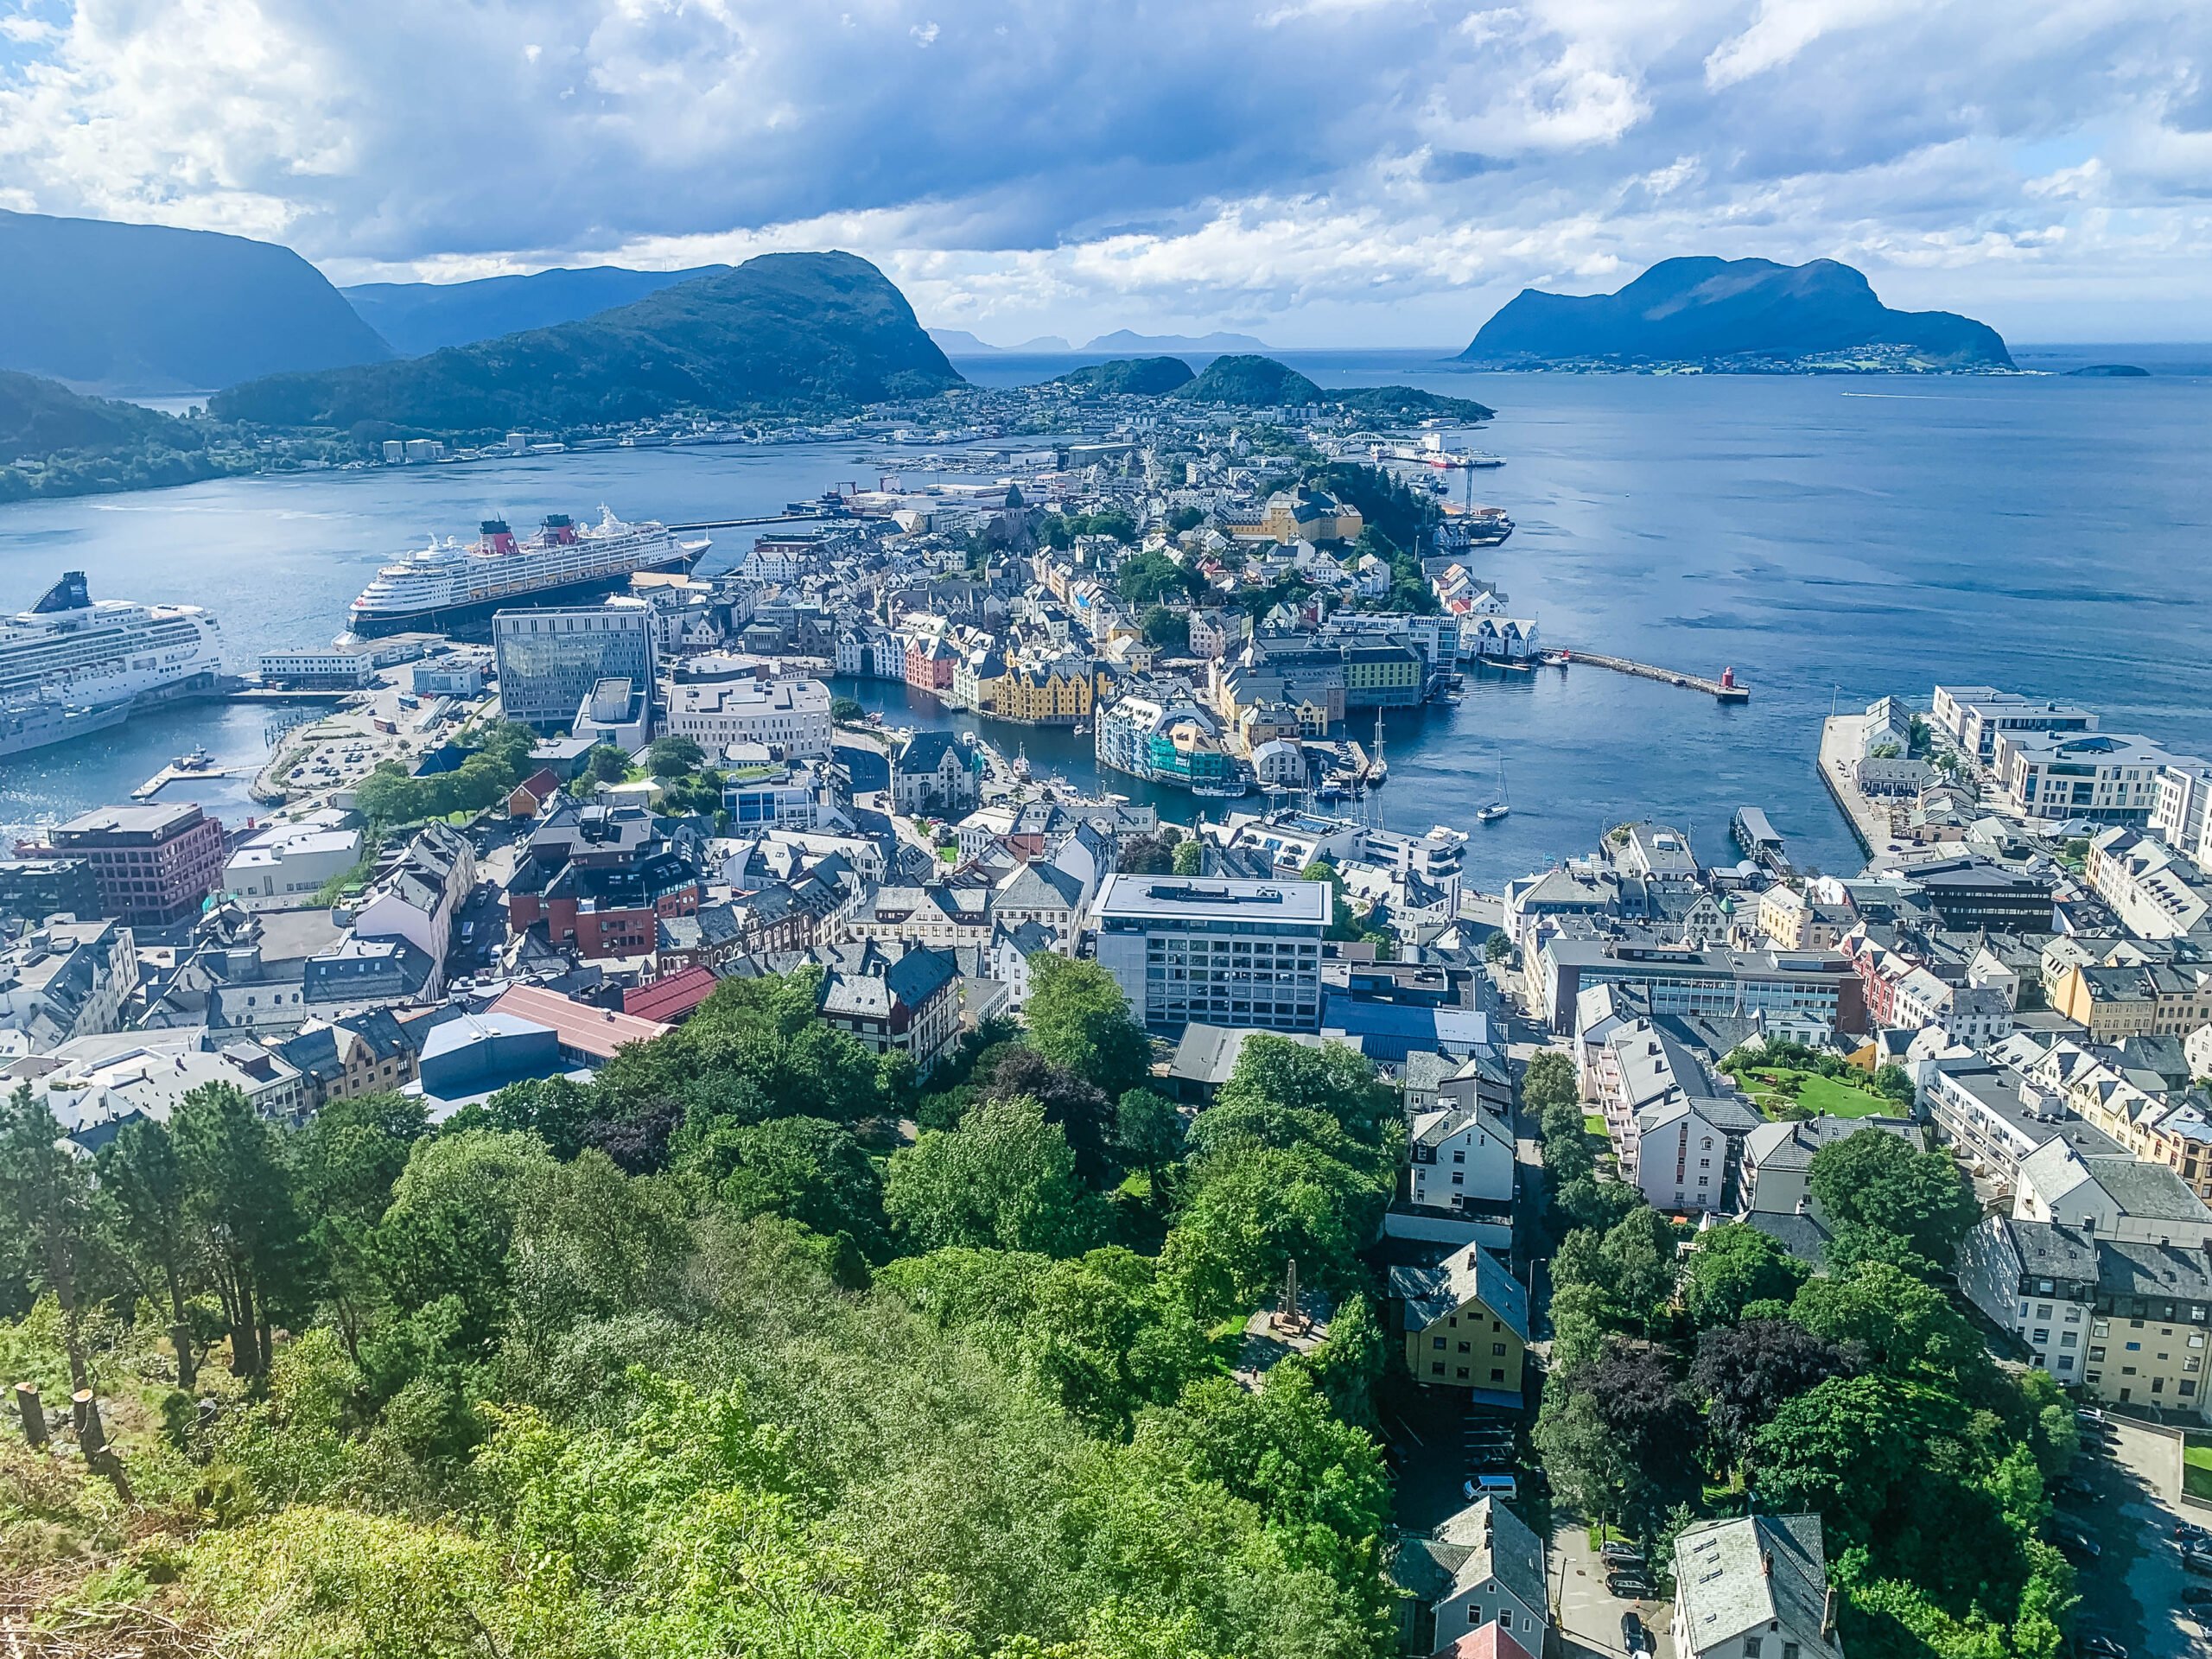 <p>If you appreciate architecture, Alesund is a town you must visit. After an all-consuming fire in 1904, the city was rebuilt in the Art Nouveau style, making it very different from other towns in Norway.</p><p>The buildings are adorned with intricate details, such as floral patterns, dragons, and other mythical creatures. The facades are painted in pastel colors, which make the town look like it came straight out of a fairy tale.</p><p>One of the most impressive buildings is the Jugendstilsenteret, a museum dedicated to the Art Nouveau style. It’s located in a former pharmacy and showcases the style’s history and development in Norway and Europe.</p>